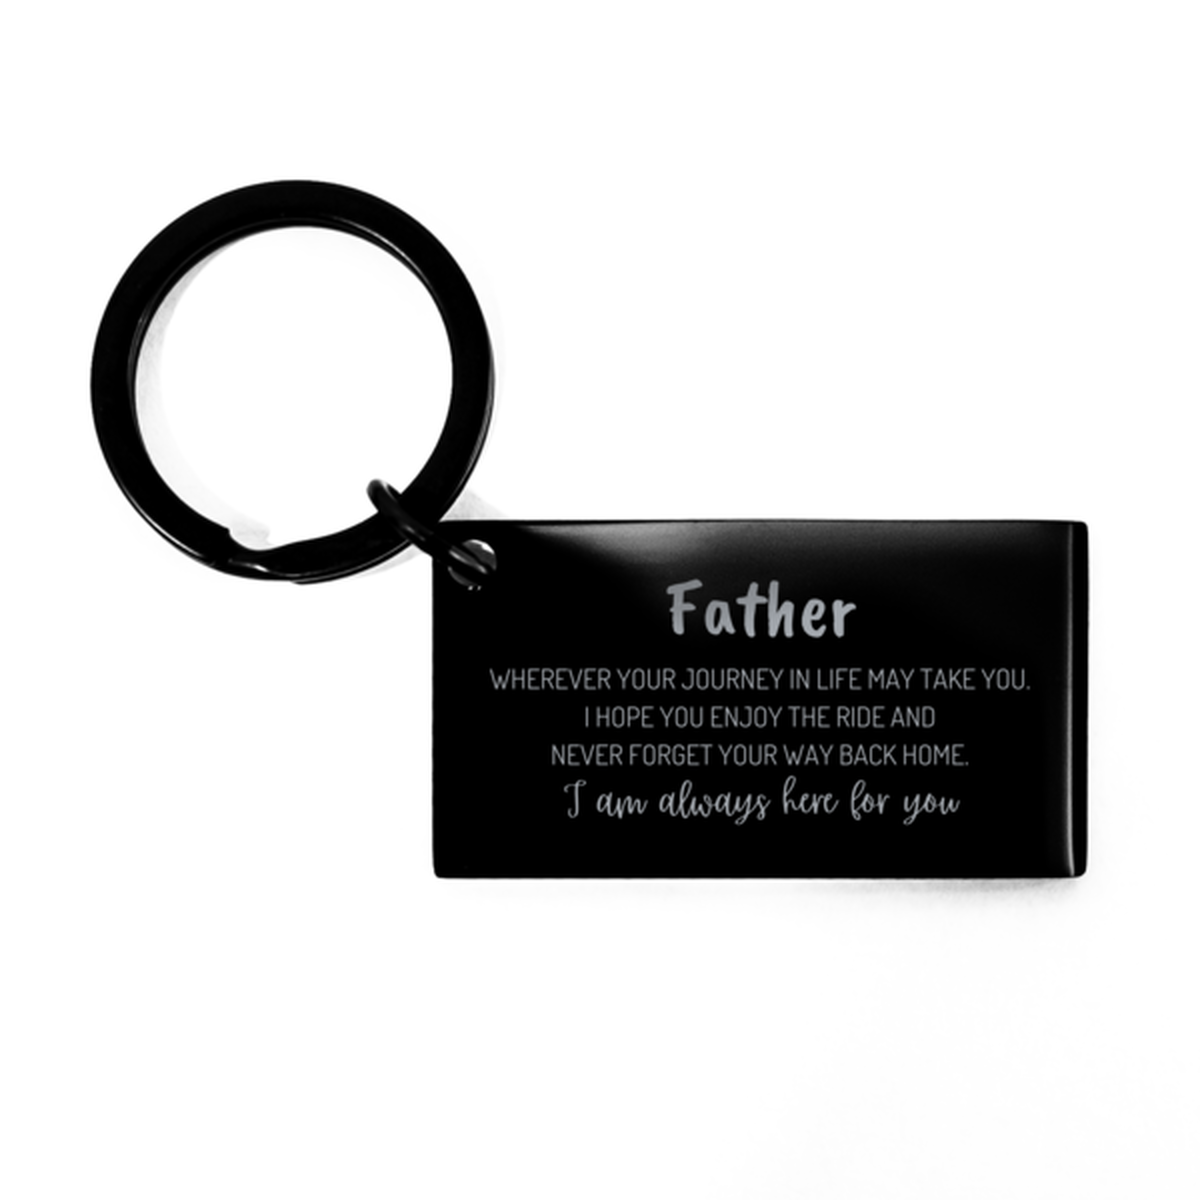 Father wherever your journey in life may take you, I am always here for you Father Keychain, Awesome Christmas Gifts For Father, Father Birthday Gifts for Men Women Family Loved One